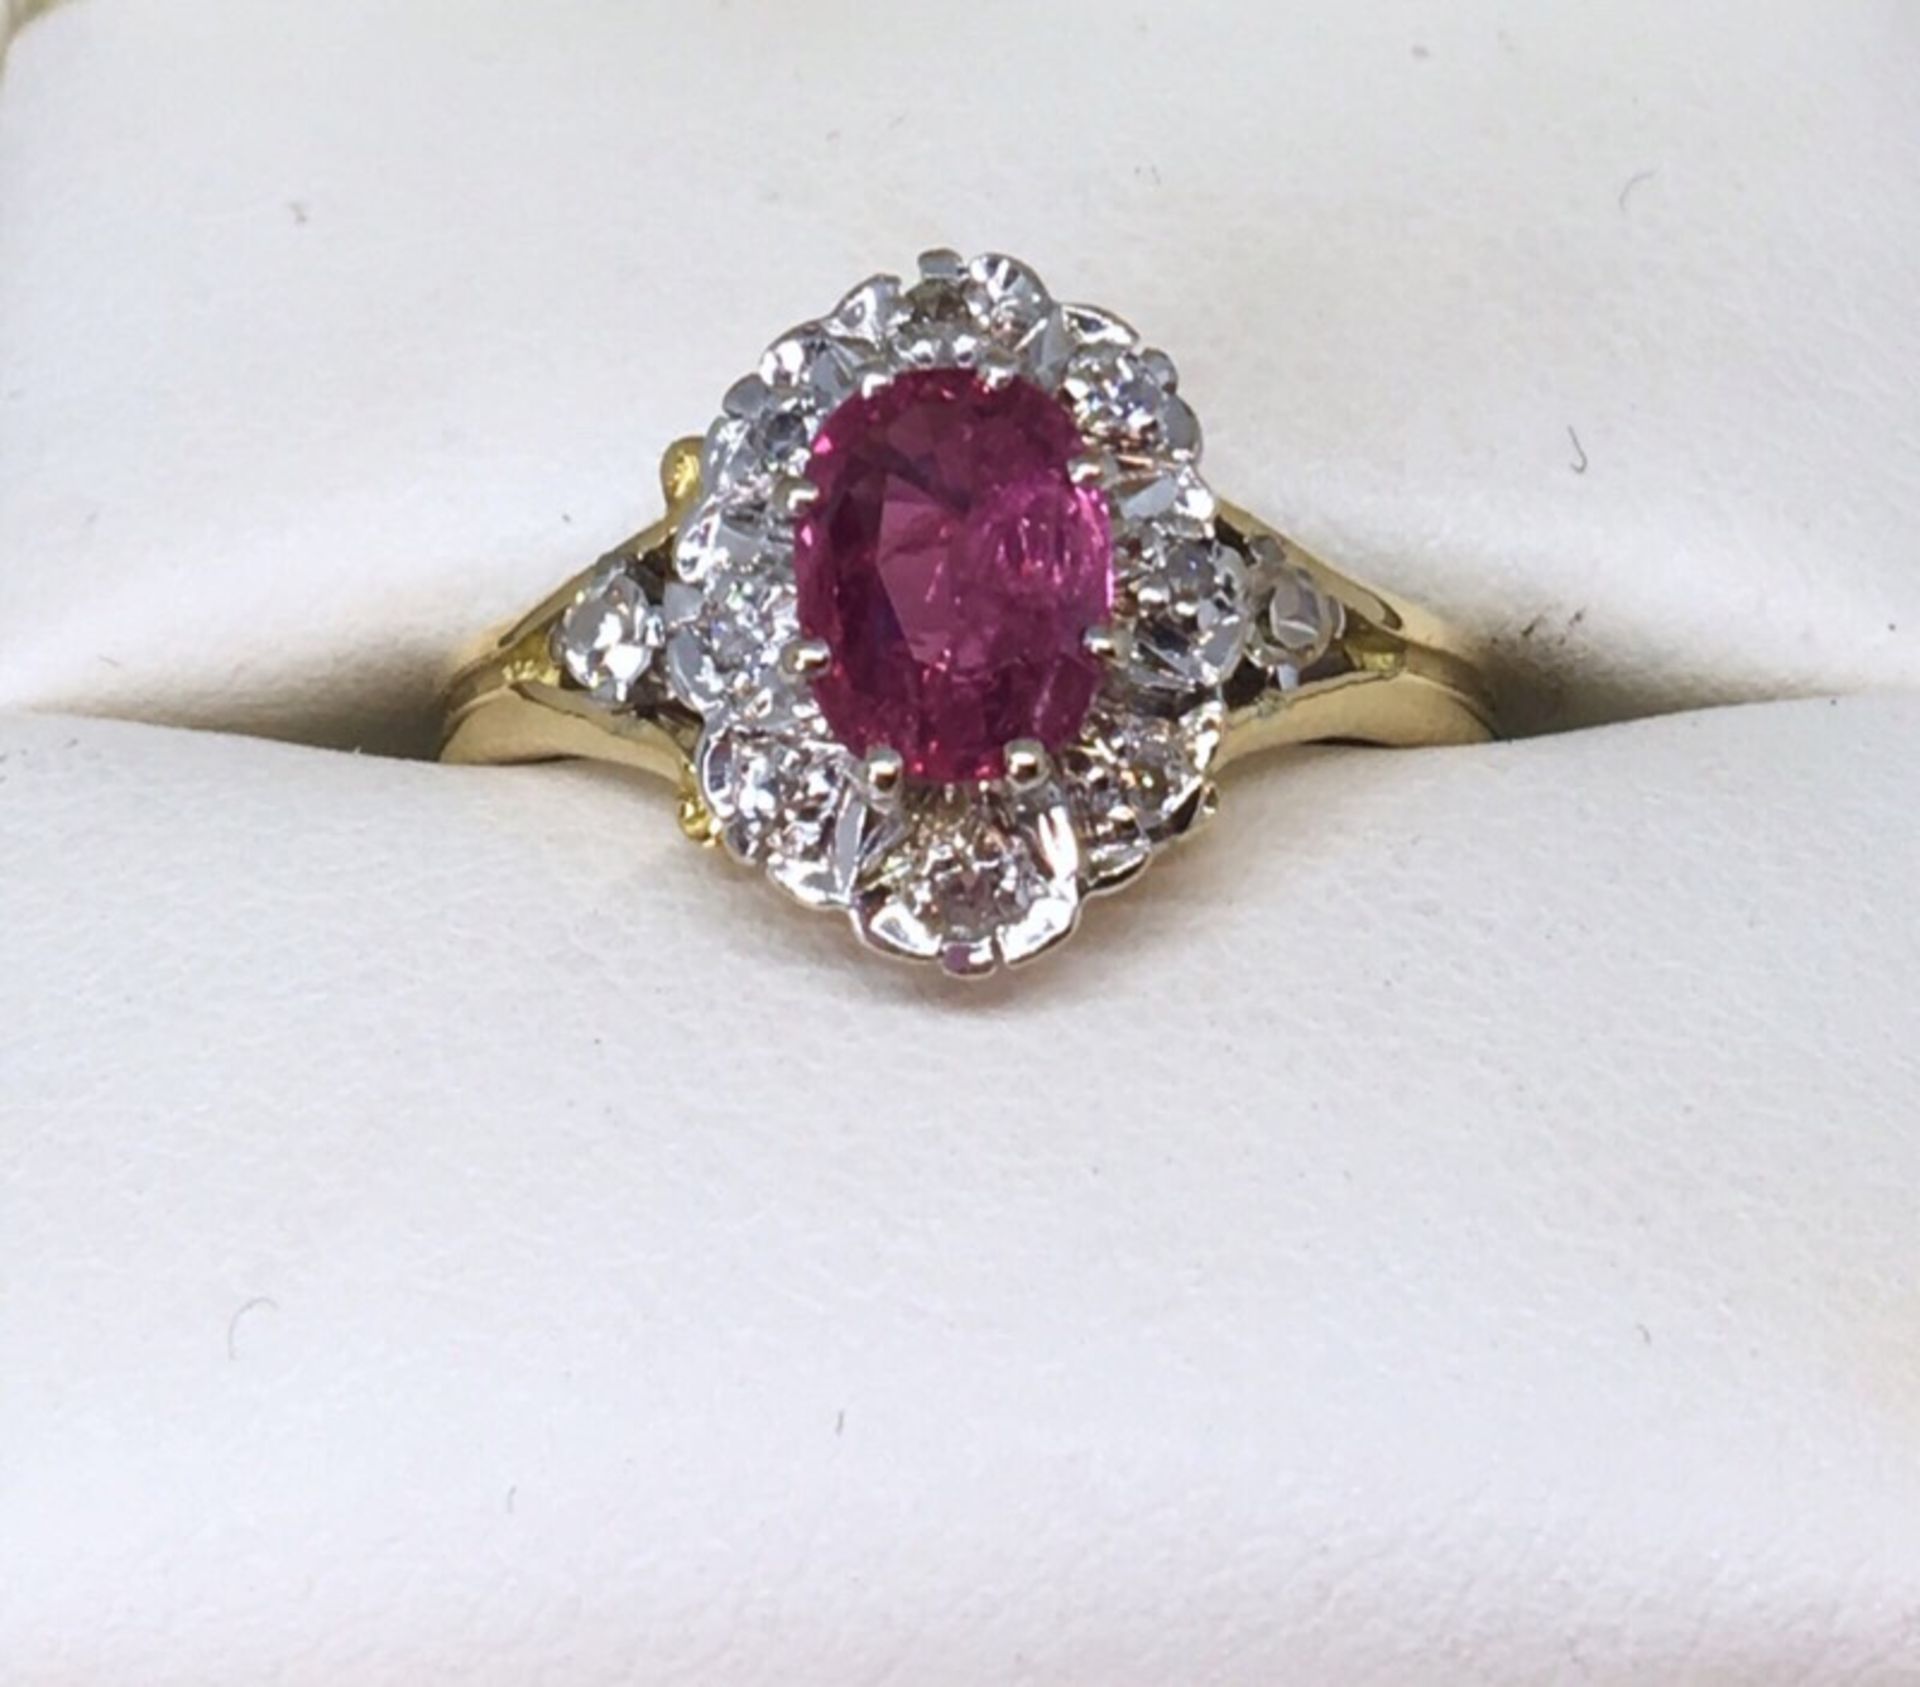 1970's VINTAGE 18ct GOLD RUBY & DIAMOND RING - Image 5 of 5